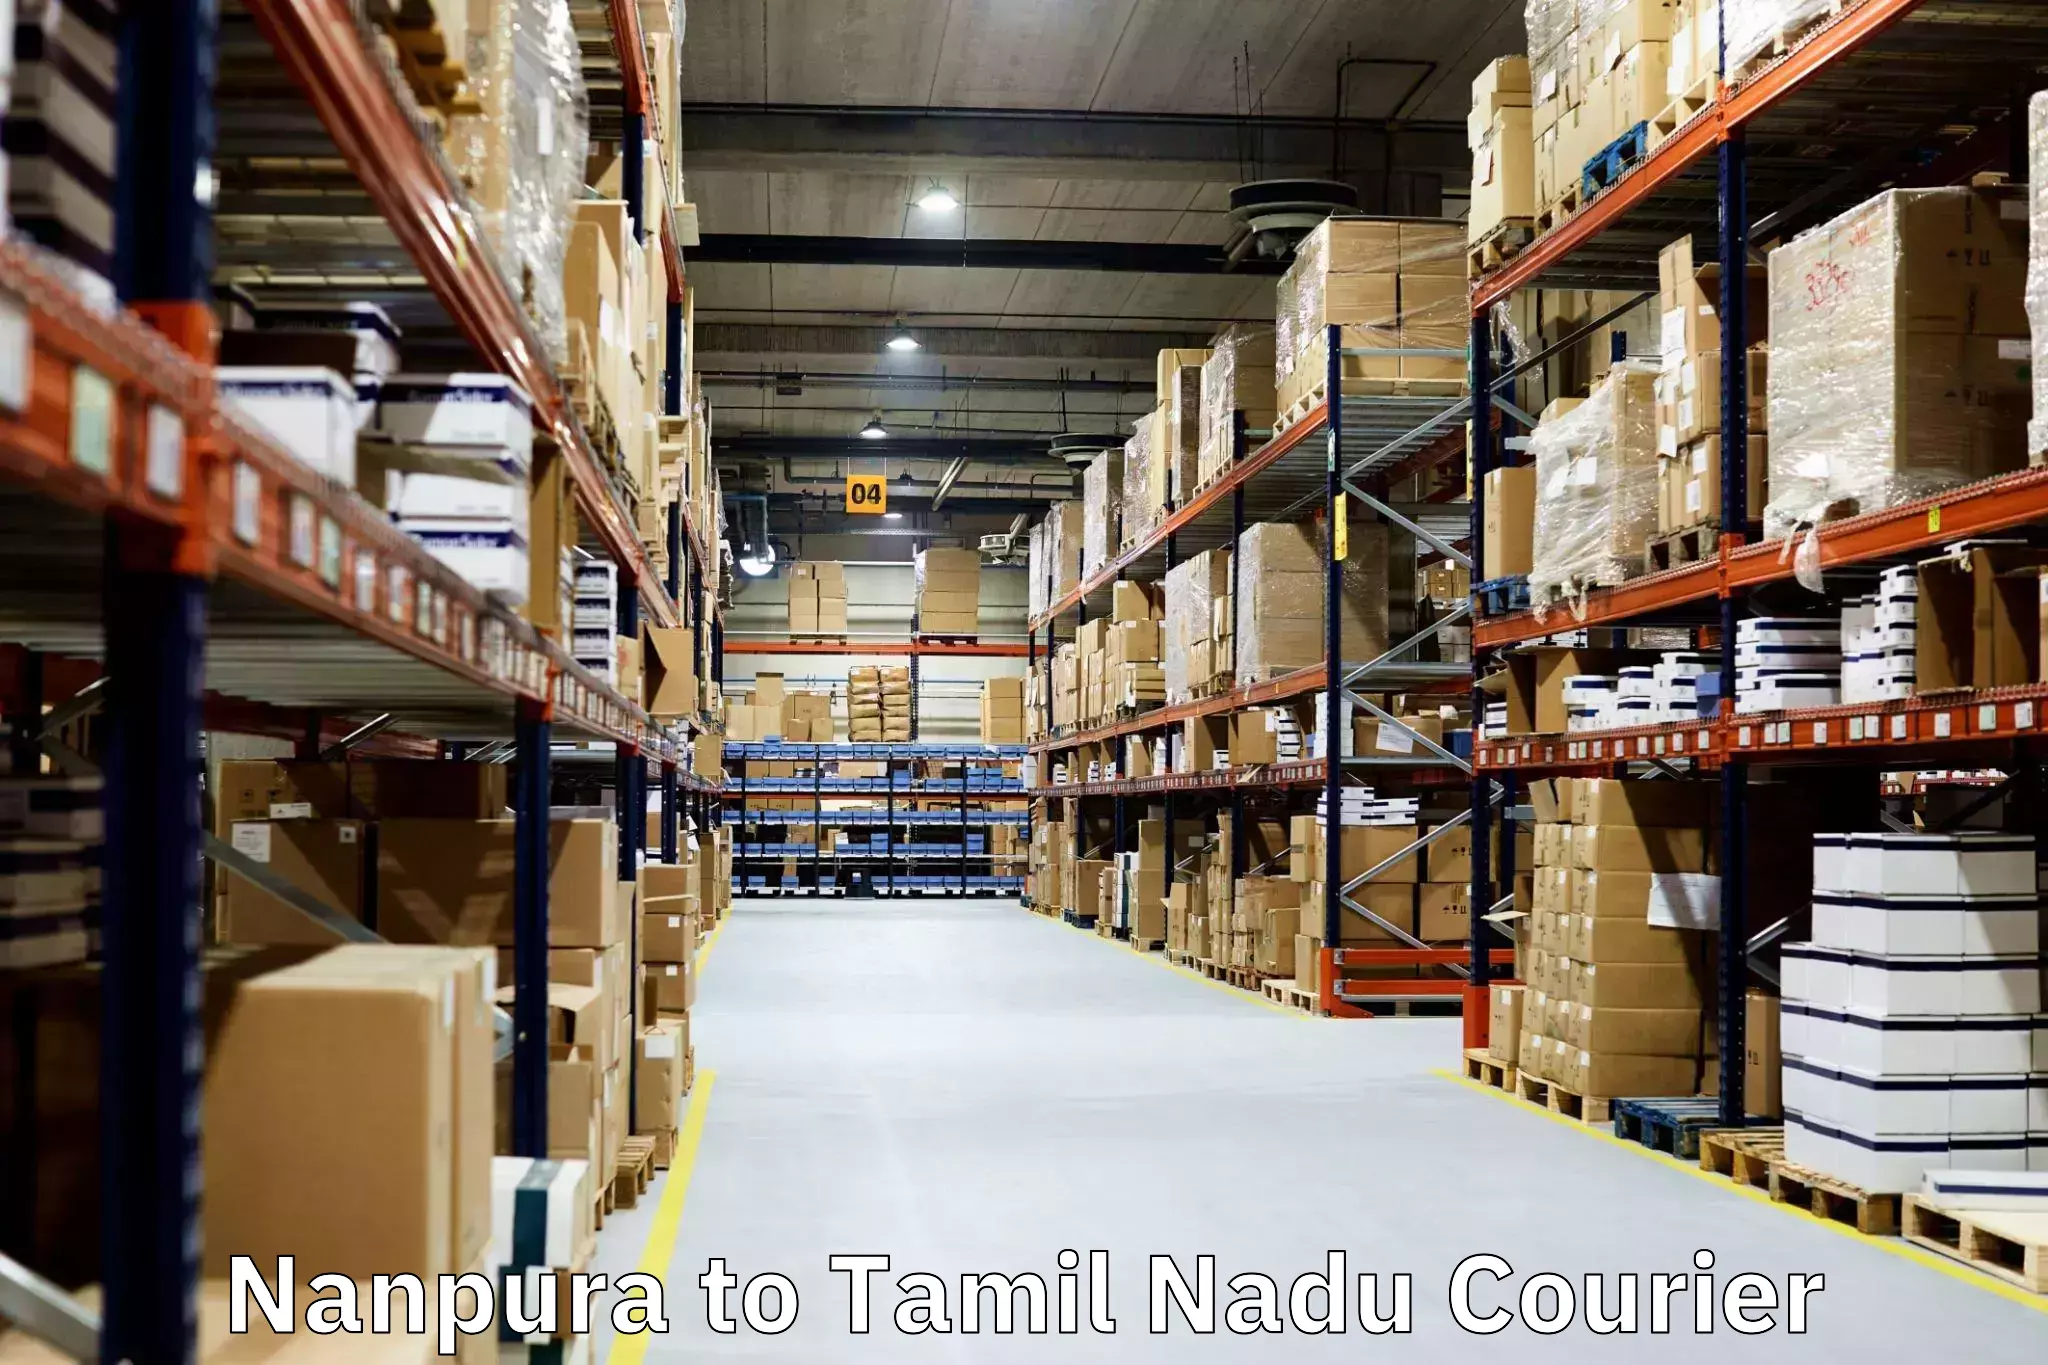 Home moving experts Nanpura to Vellore Institute of Technology